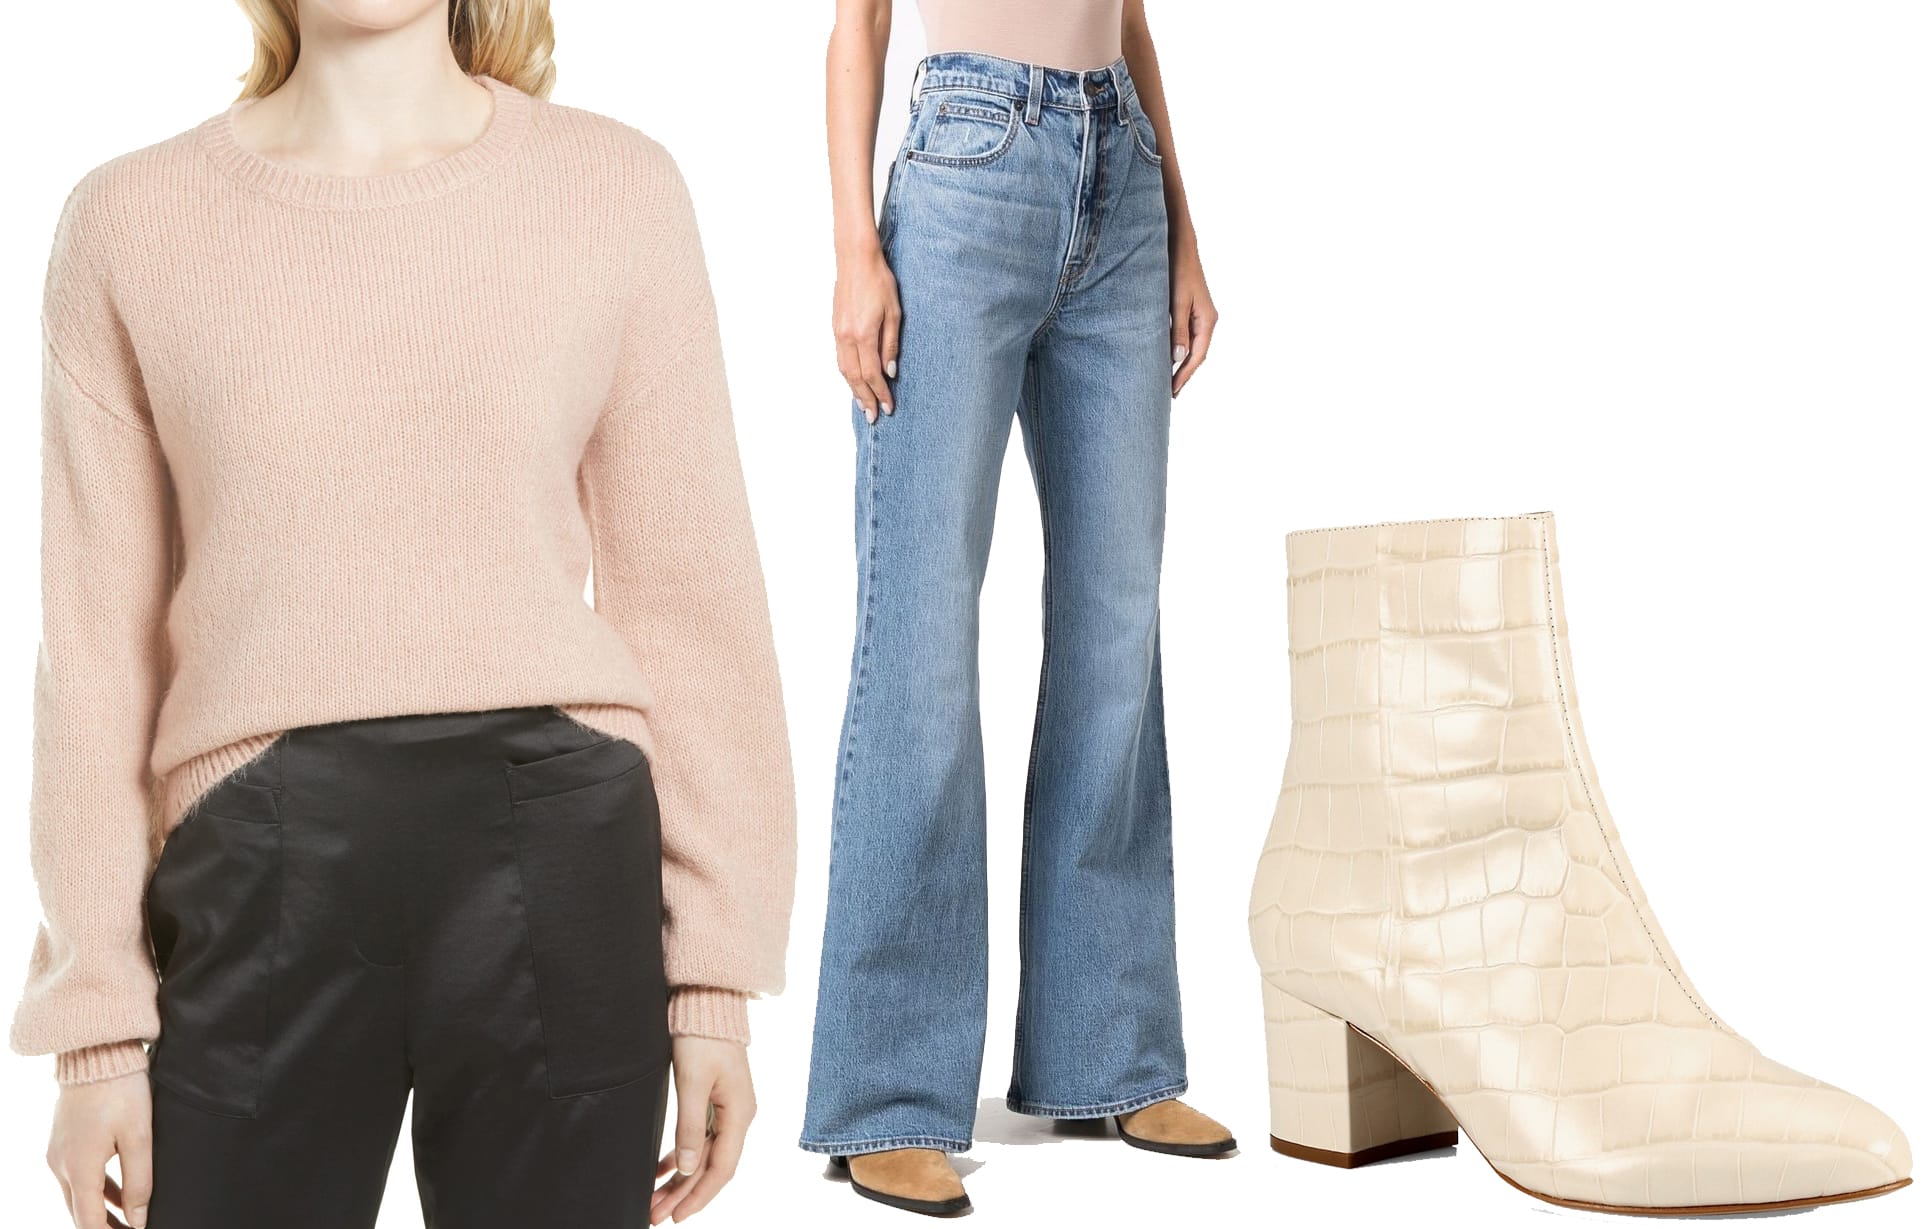 Halogen Cozy Crewneck Sweater, Levi's Flared High-Rise Jeans, Schutz Lupe Croc-Embossed Leather Booties